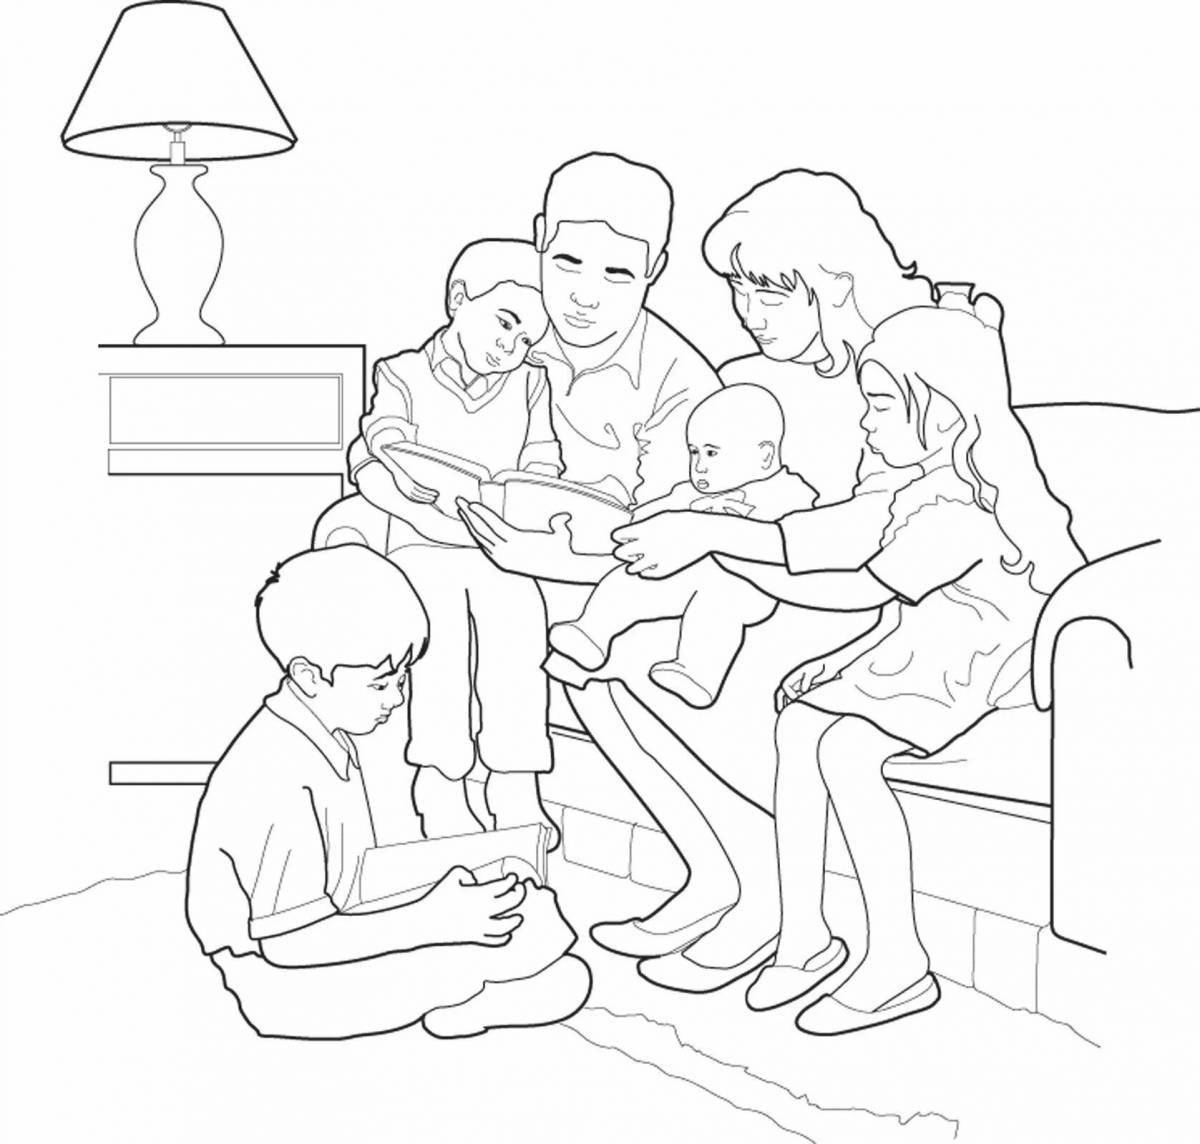 Merciful family coloring book